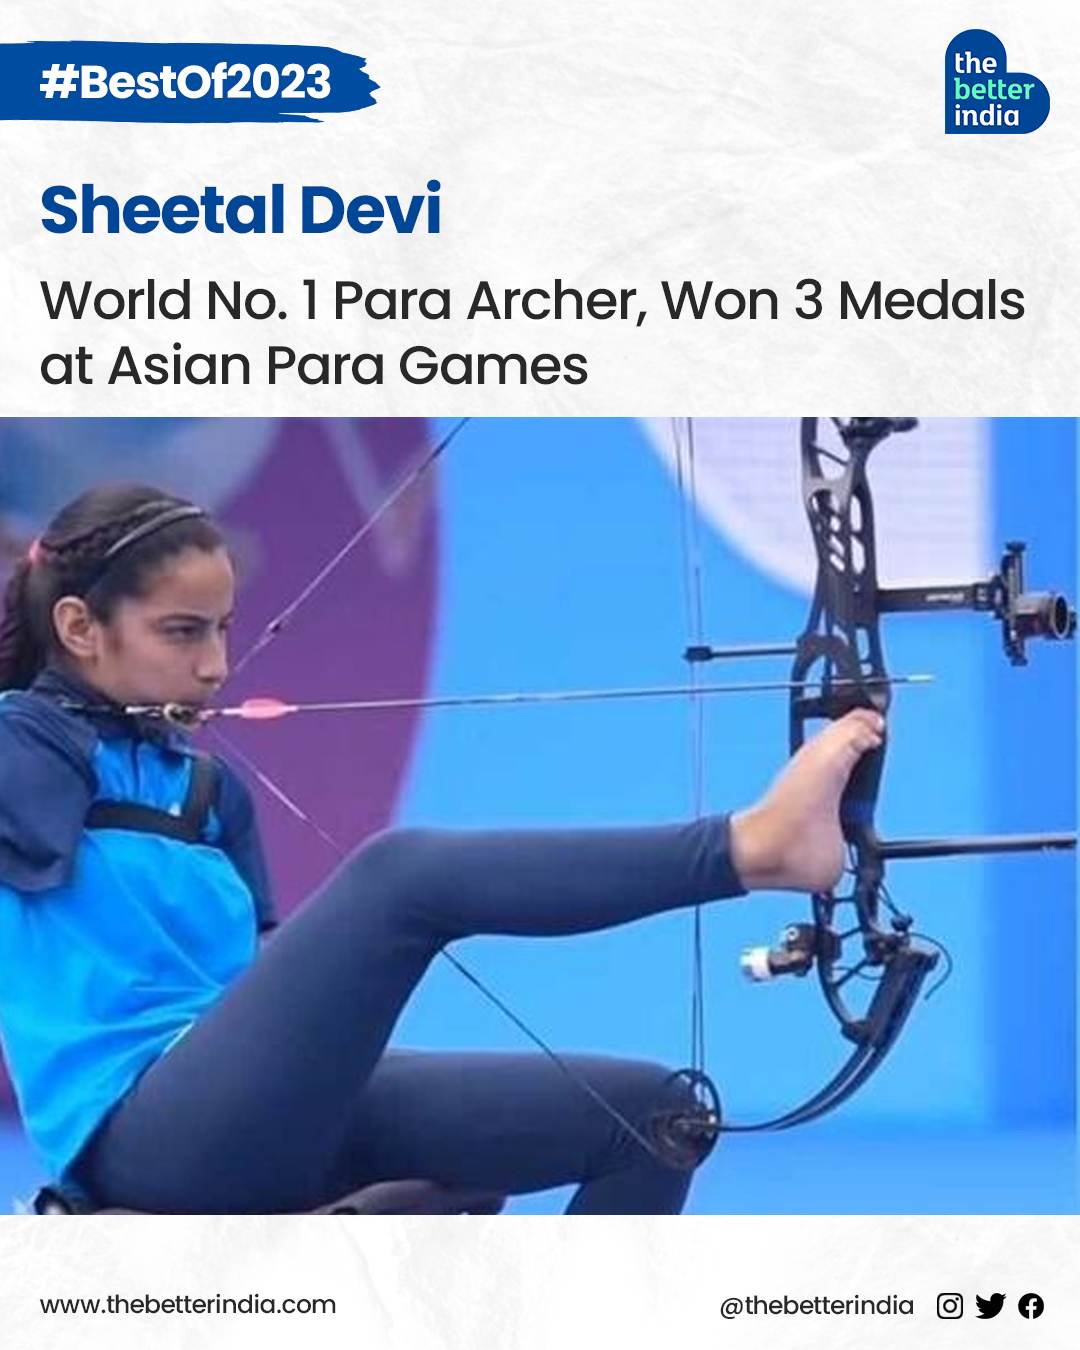 Sheetal Devi is the youngest female armless archer to win a medal at the 2023 Para Archery World Championships